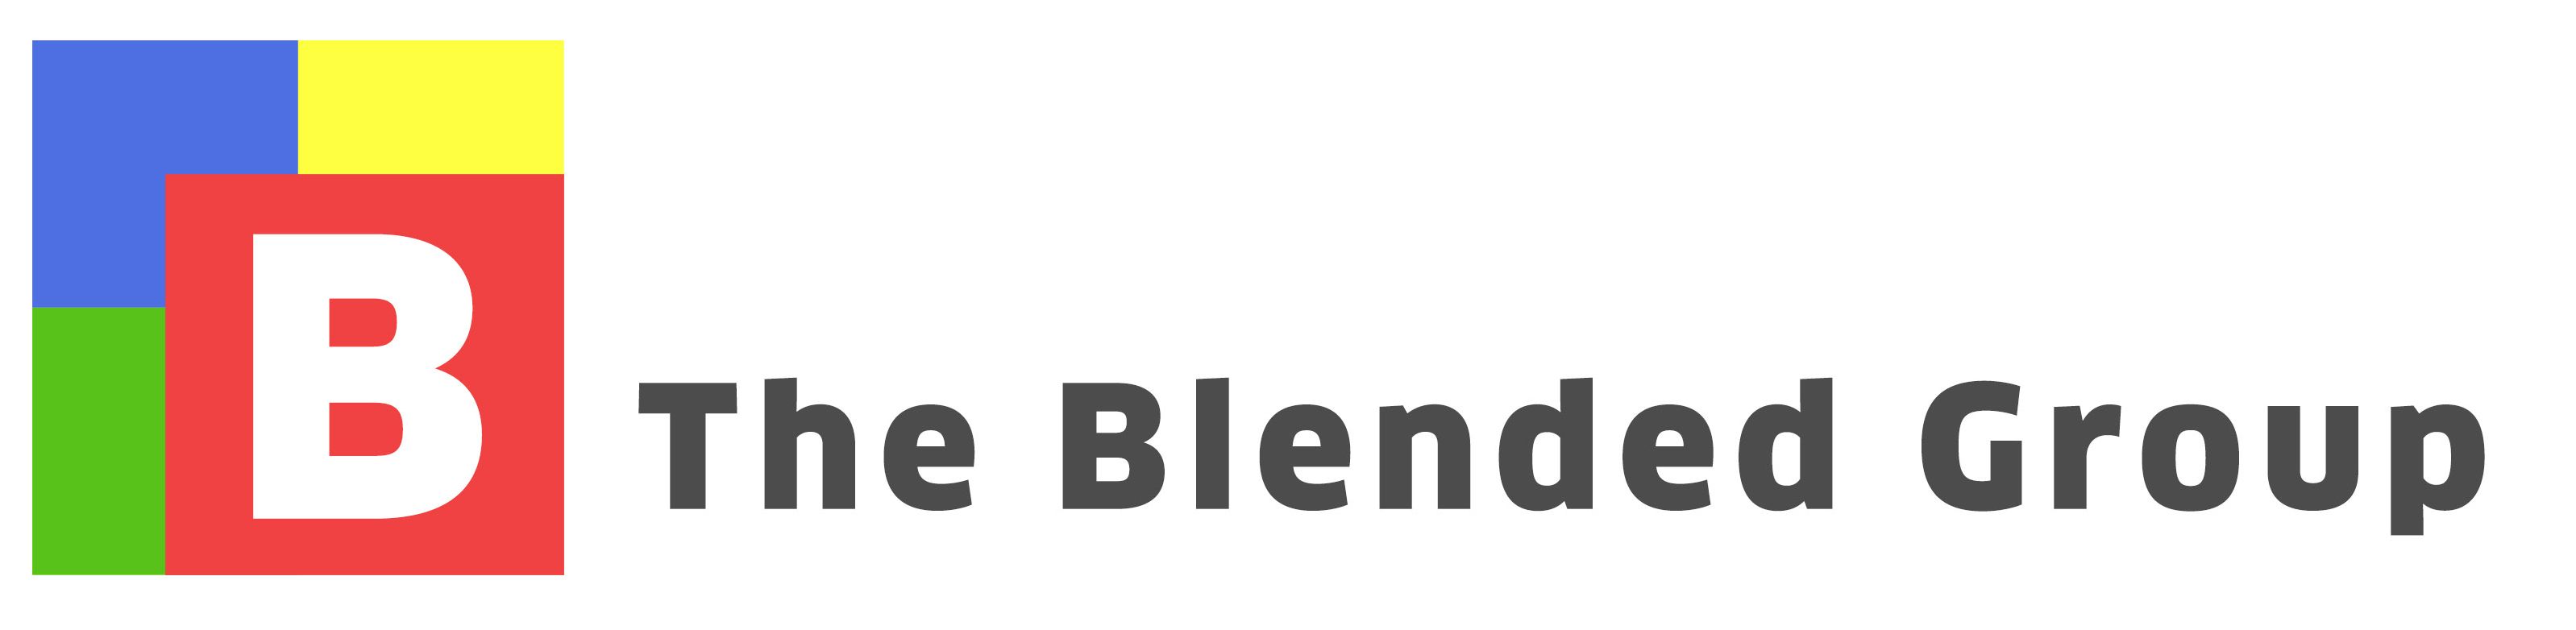 The Blended Group